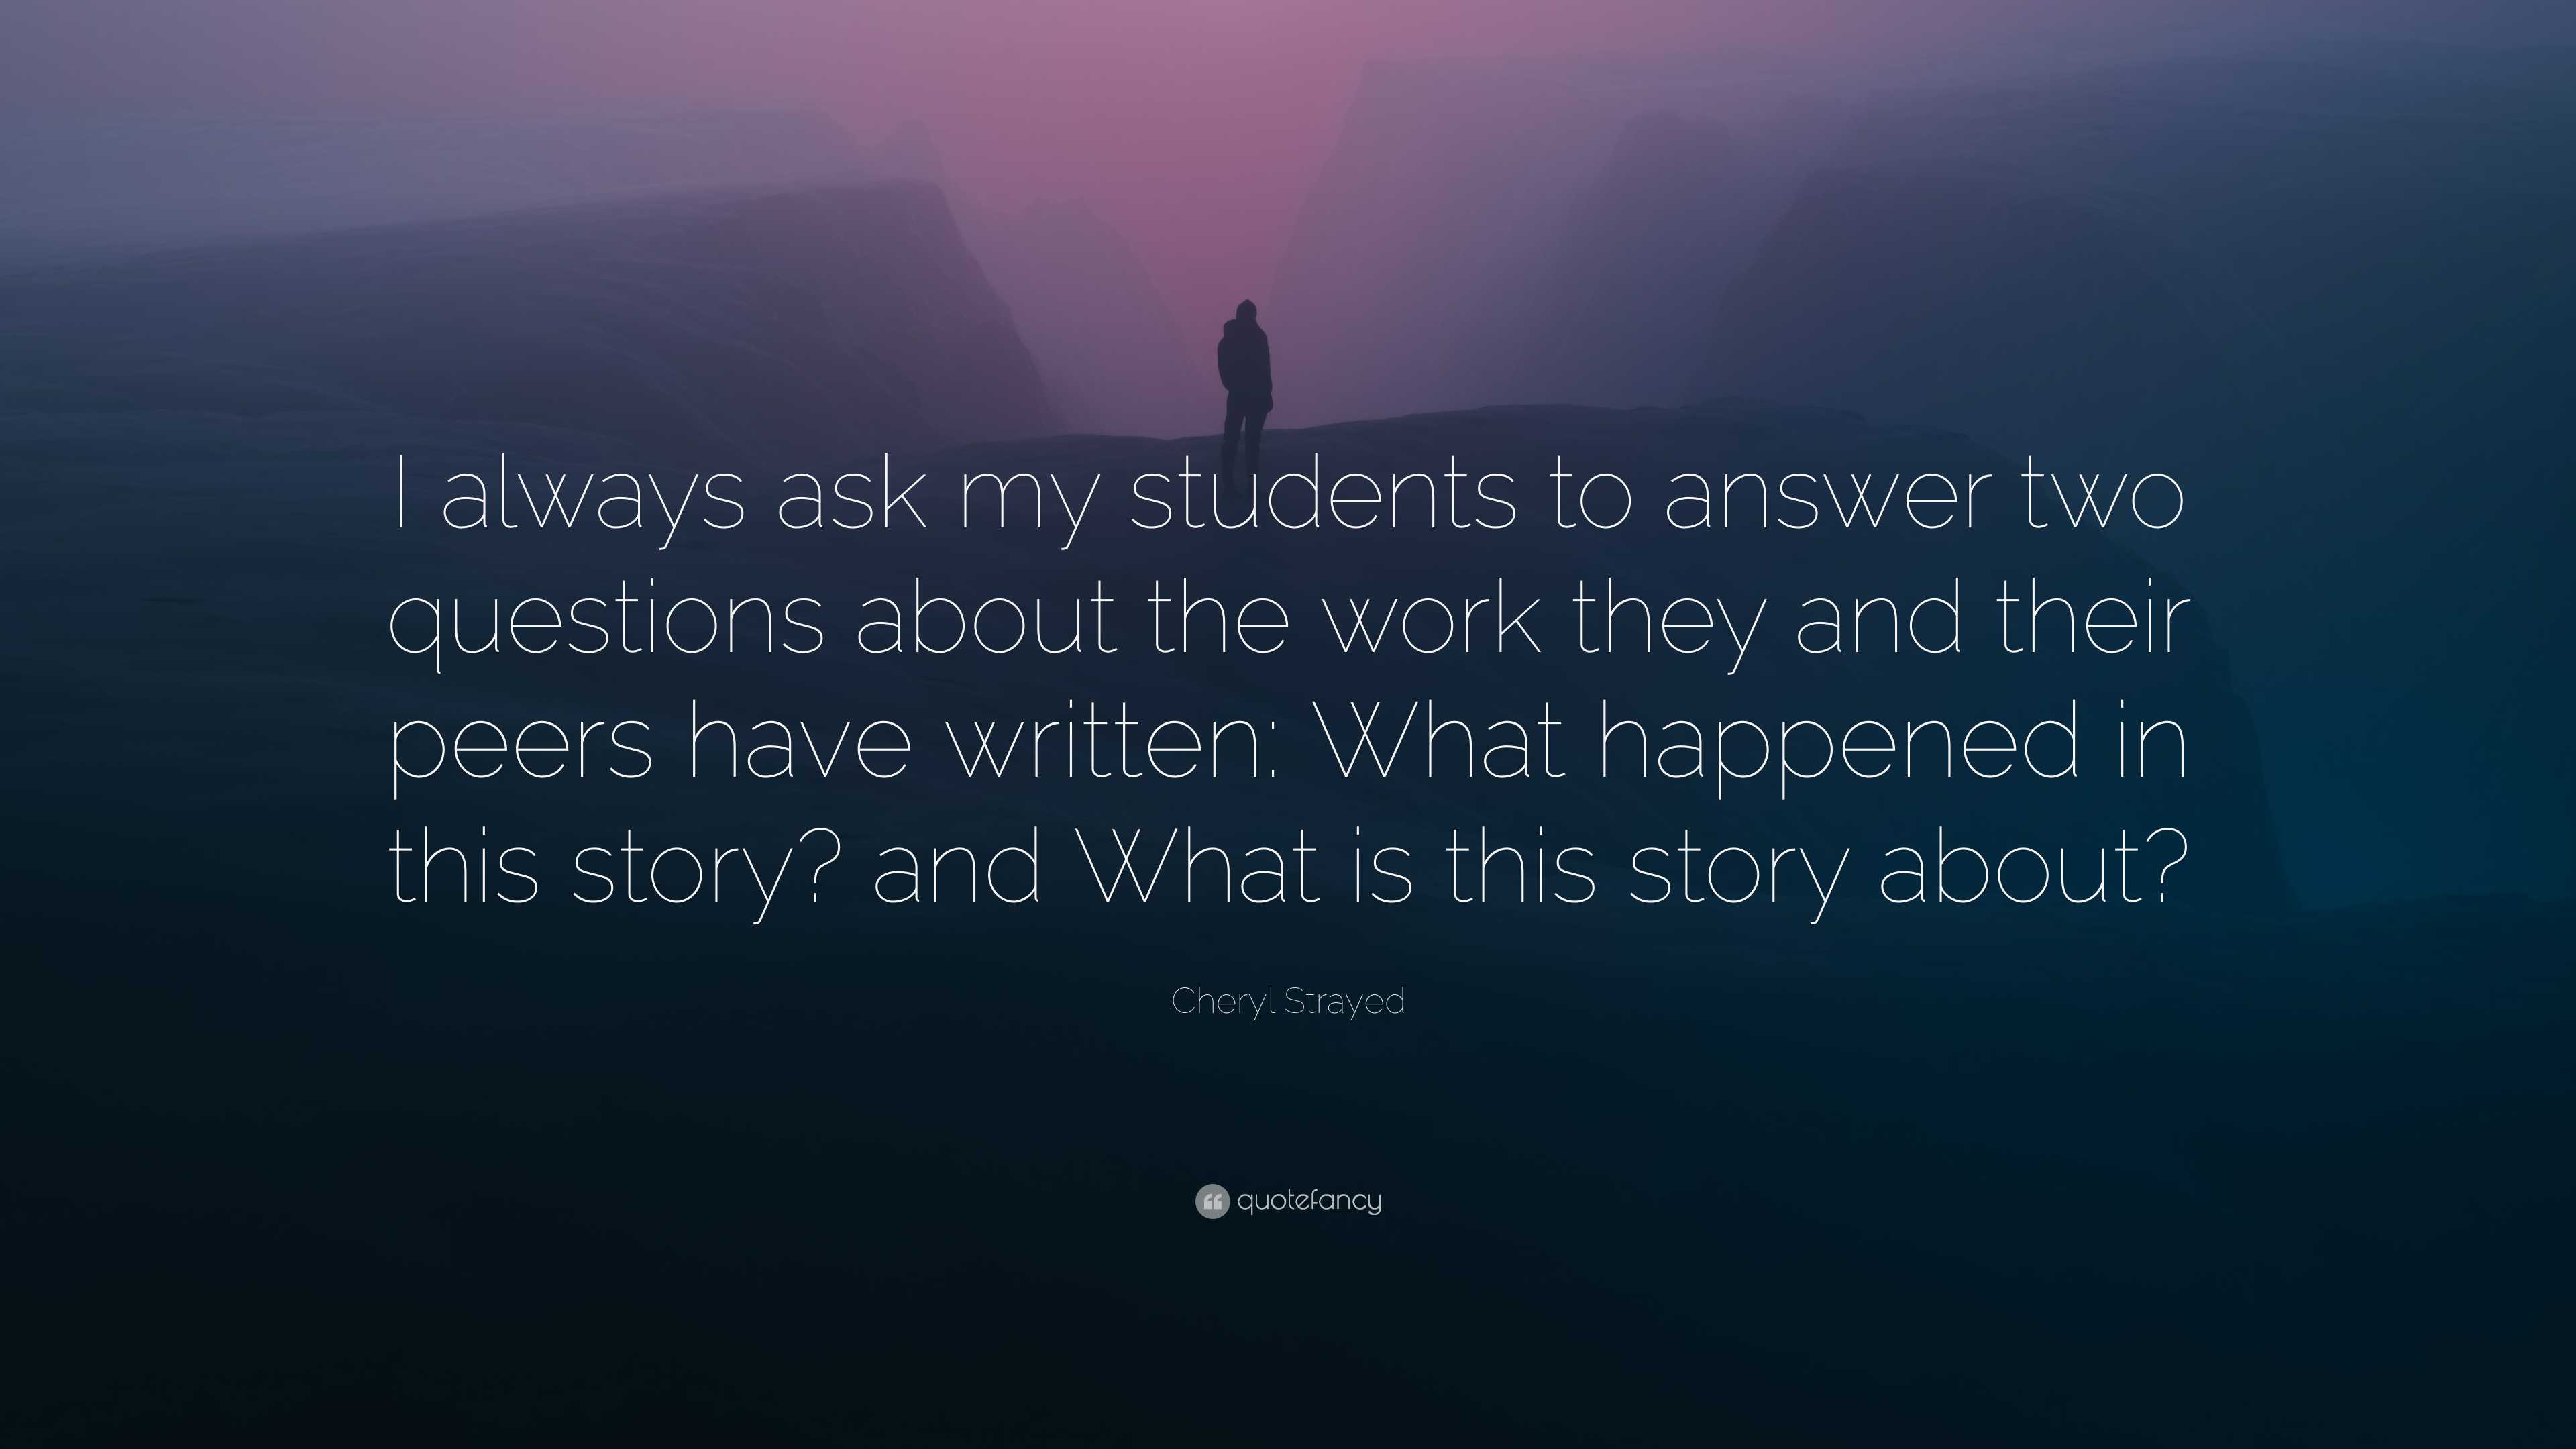 Cheryl Strayed Quote: “I always ask my students to answer two questions ...